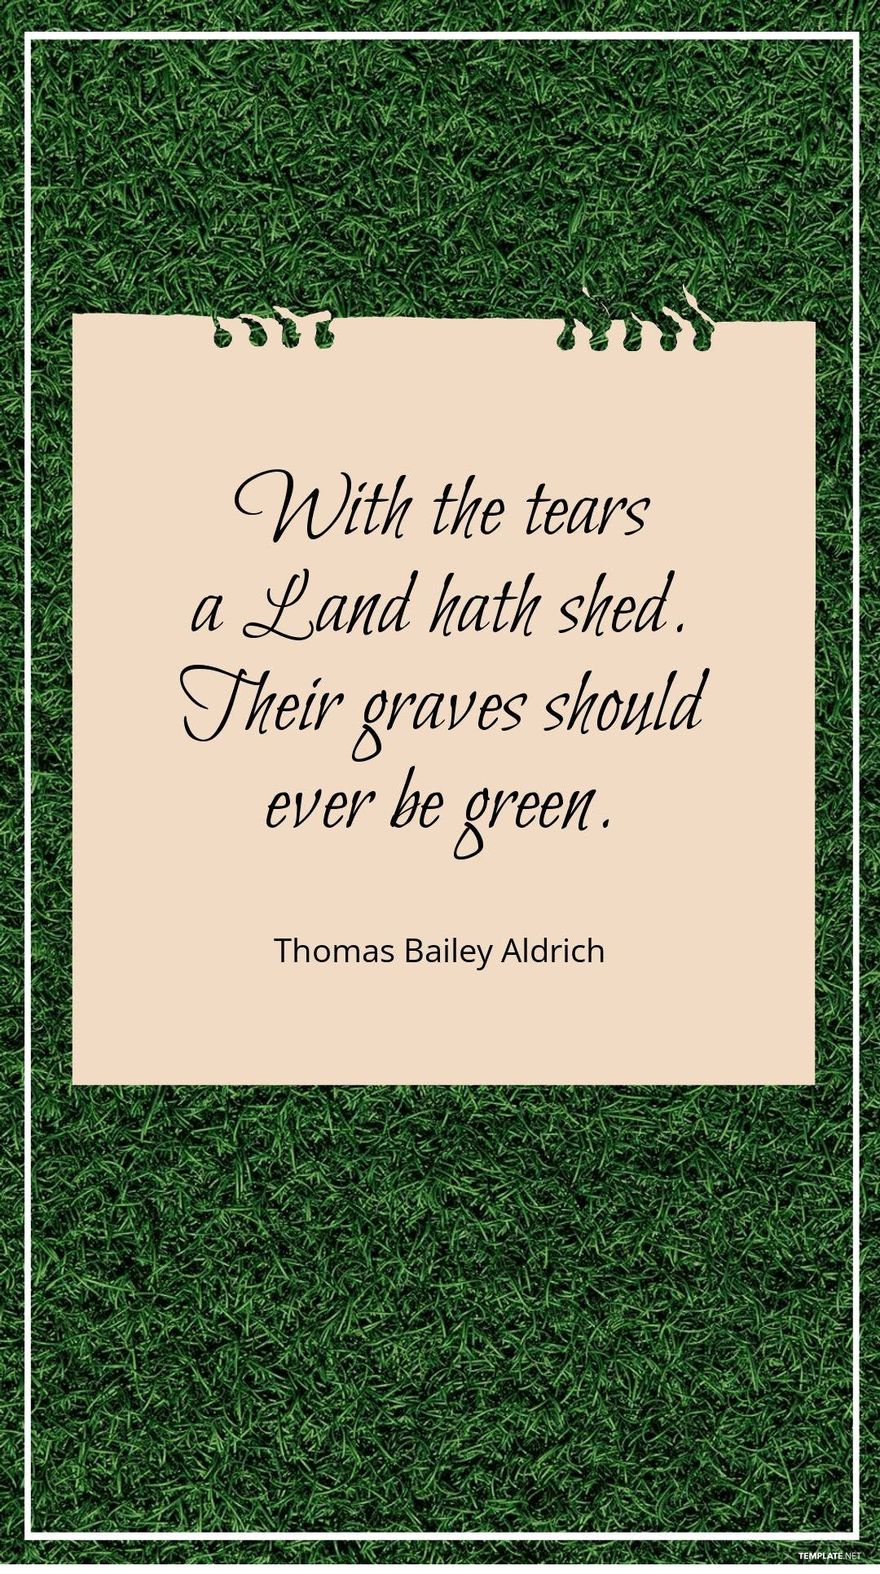 Free Thomas Bailey Aldrich - With the tears a Land hath shed. Their graves should ever be green.